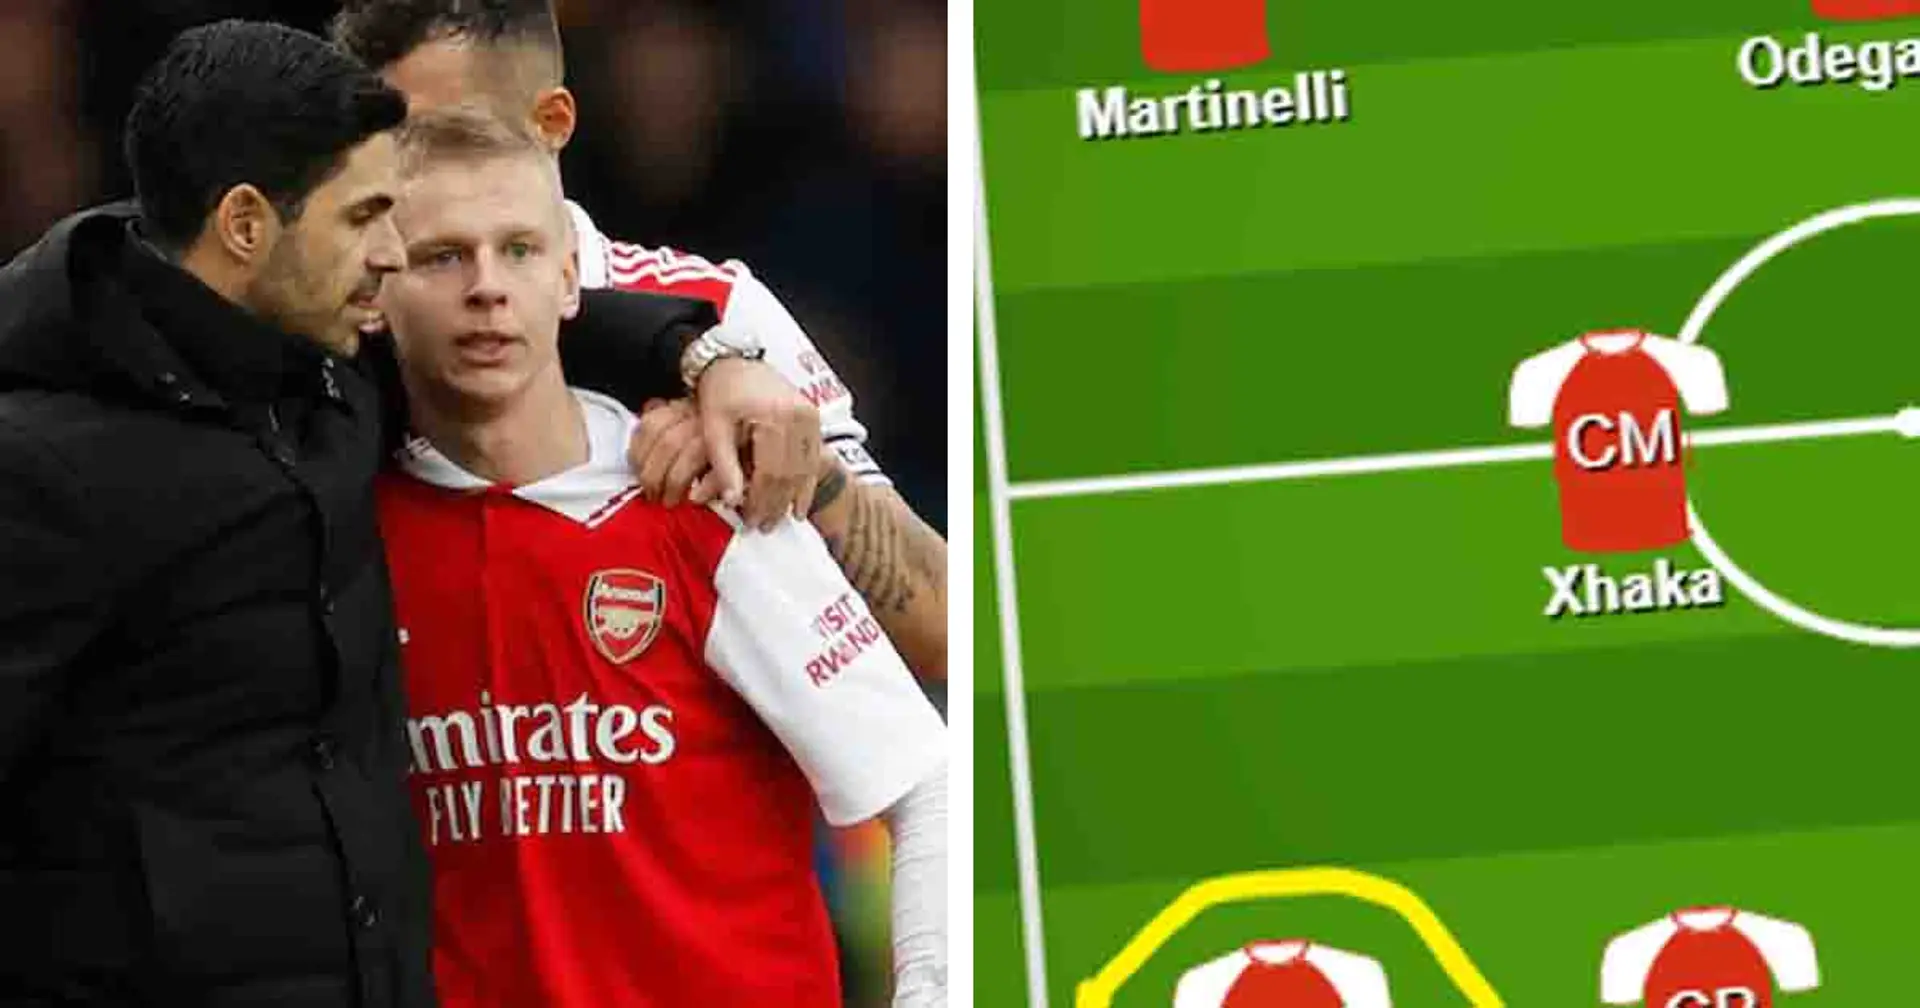 Arsenal's biggest strengths in Everton win shown in pic - two players feature